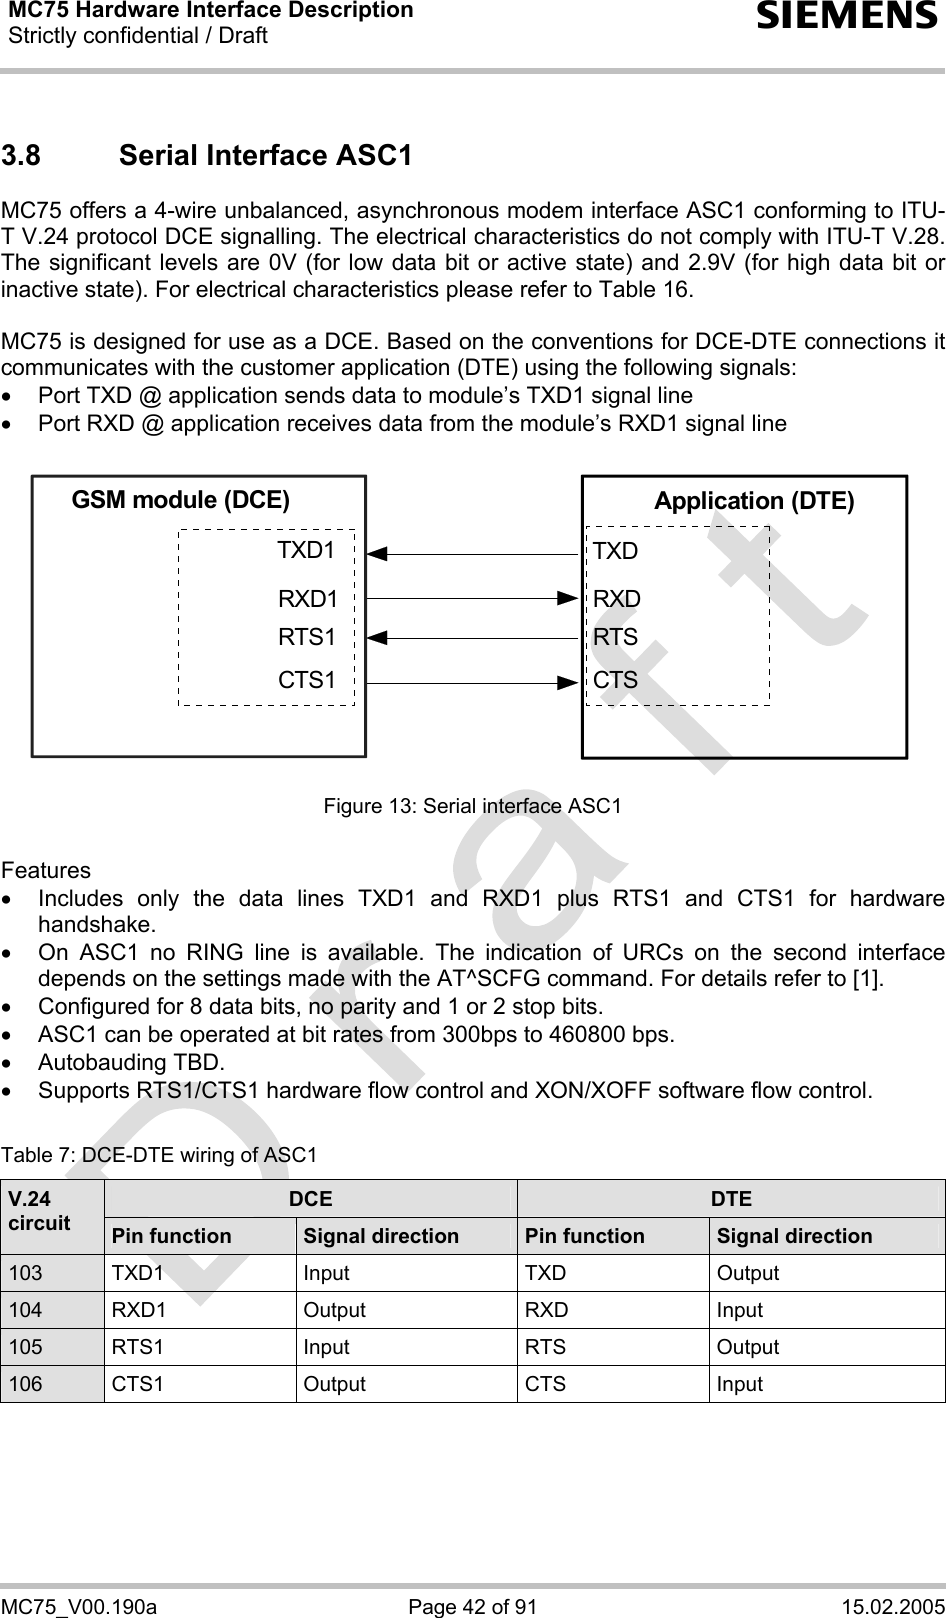 MC75 Hardware Interface Description Strictly confidential / Draft  s MC75_V00.190a  Page 42 of 91  15.02.2005 3.8  Serial Interface ASC1 MC75 offers a 4-wire unbalanced, asynchronous modem interface ASC1 conforming to ITU-T V.24 protocol DCE signalling. The electrical characteristics do not comply with ITU-T V.28. The significant levels are 0V (for low data bit or active state) and 2.9V (for high data bit or inactive state). For electrical characteristics please refer to Table 16.  MC75 is designed for use as a DCE. Based on the conventions for DCE-DTE connections it communicates with the customer application (DTE) using the following signals: •  Port TXD @ application sends data to module’s TXD1 signal line •  Port RXD @ application receives data from the module’s RXD1 signal line  GSM module (DCE) Application (DTE)TXDRXDRTSCTSTXD1RXD1RTS1CTS1 Figure 13: Serial interface ASC1  Features •  Includes only the data lines TXD1 and RXD1 plus RTS1 and CTS1 for hardware handshake.  •  On ASC1 no RING line is available. The indication of URCs on the second interface depends on the settings made with the AT^SCFG command. For details refer to [1]. •  Configured for 8 data bits, no parity and 1 or 2 stop bits. •  ASC1 can be operated at bit rates from 300bps to 460800 bps.  •  Autobauding TBD. •  Supports RTS1/CTS1 hardware flow control and XON/XOFF software flow control.  Table 7: DCE-DTE wiring of ASC1 DCE  DTE V.24 circuit  Pin function  Signal direction  Pin function  Signal direction 103  TXD1 Input  TXD  Output 104  RXD1 Output  RXD  Input 105  RTS1 Input  RTS  Output 106  CTS1 Output  CTS  Input   